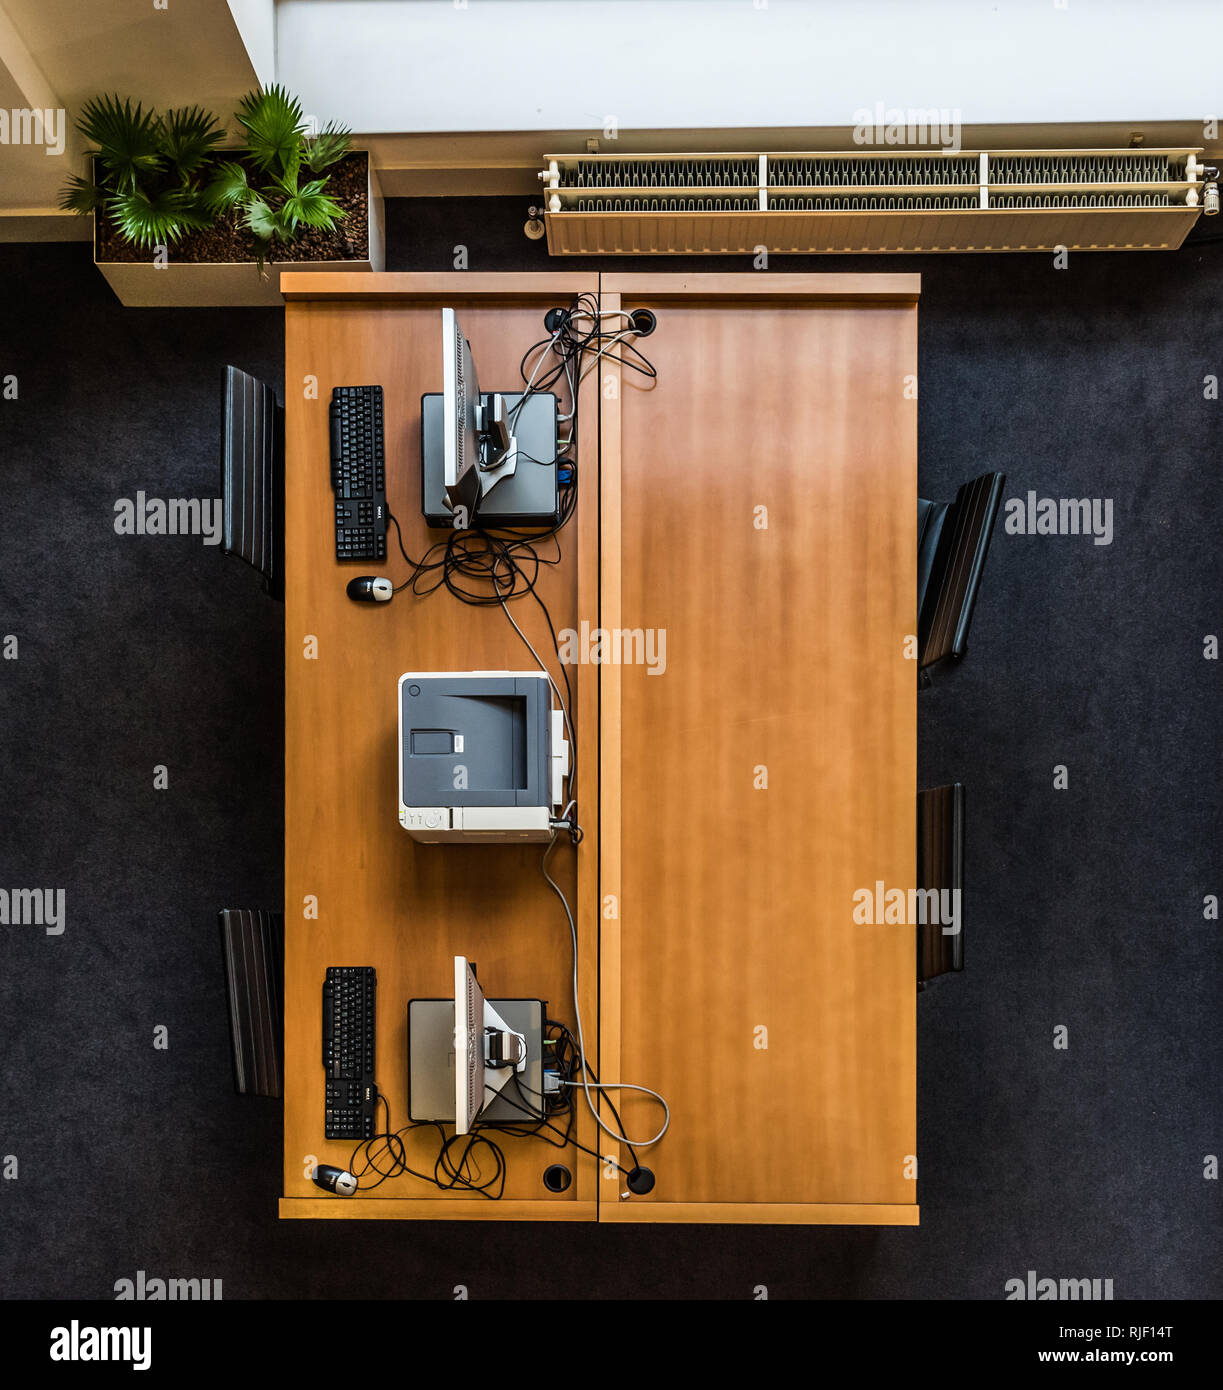 Brussels, Belgium - 02 02 2019: View from above of a wooden desk, PC, keyboard, printer and office decorations in the Brussels Parliament Stock Photo